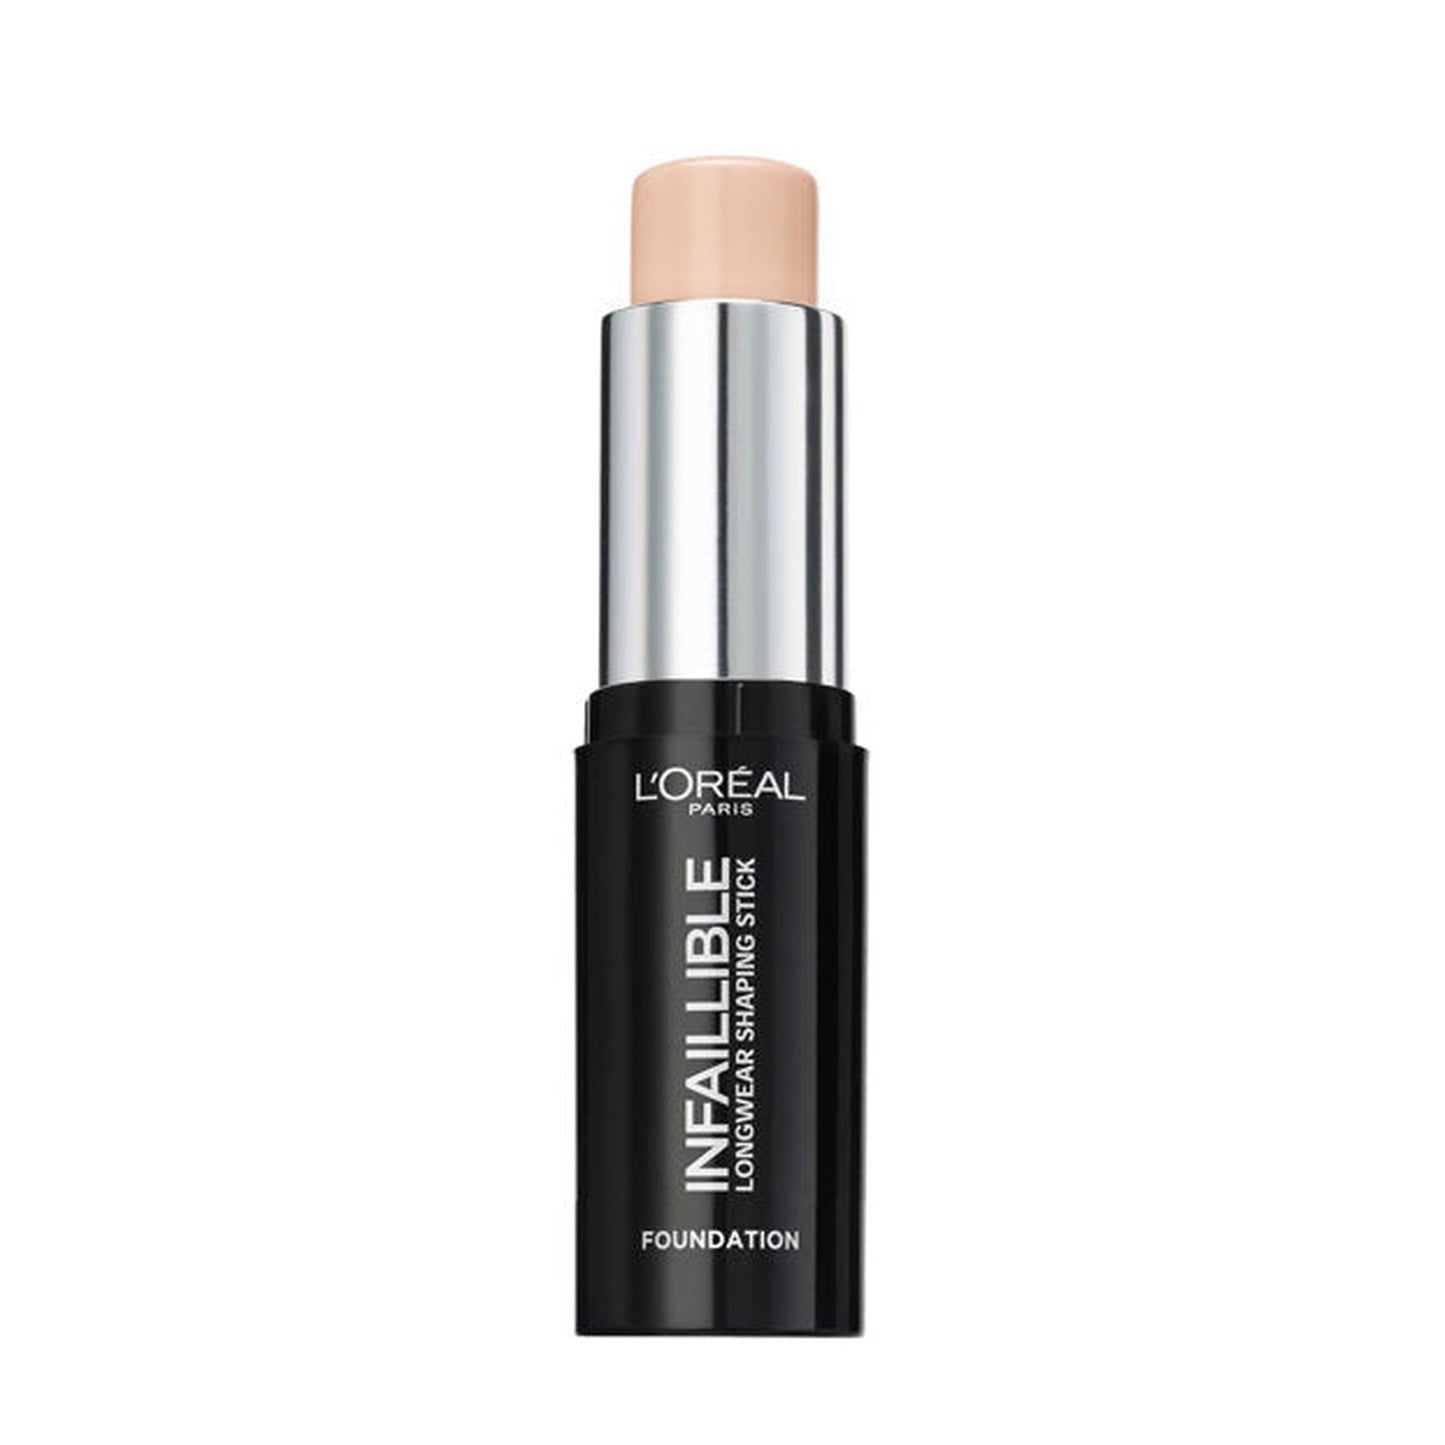 L'Oreal Infallible Foundation Stick - 130 Vanille-L'Oreal-BeautyNmakeup.co.uk